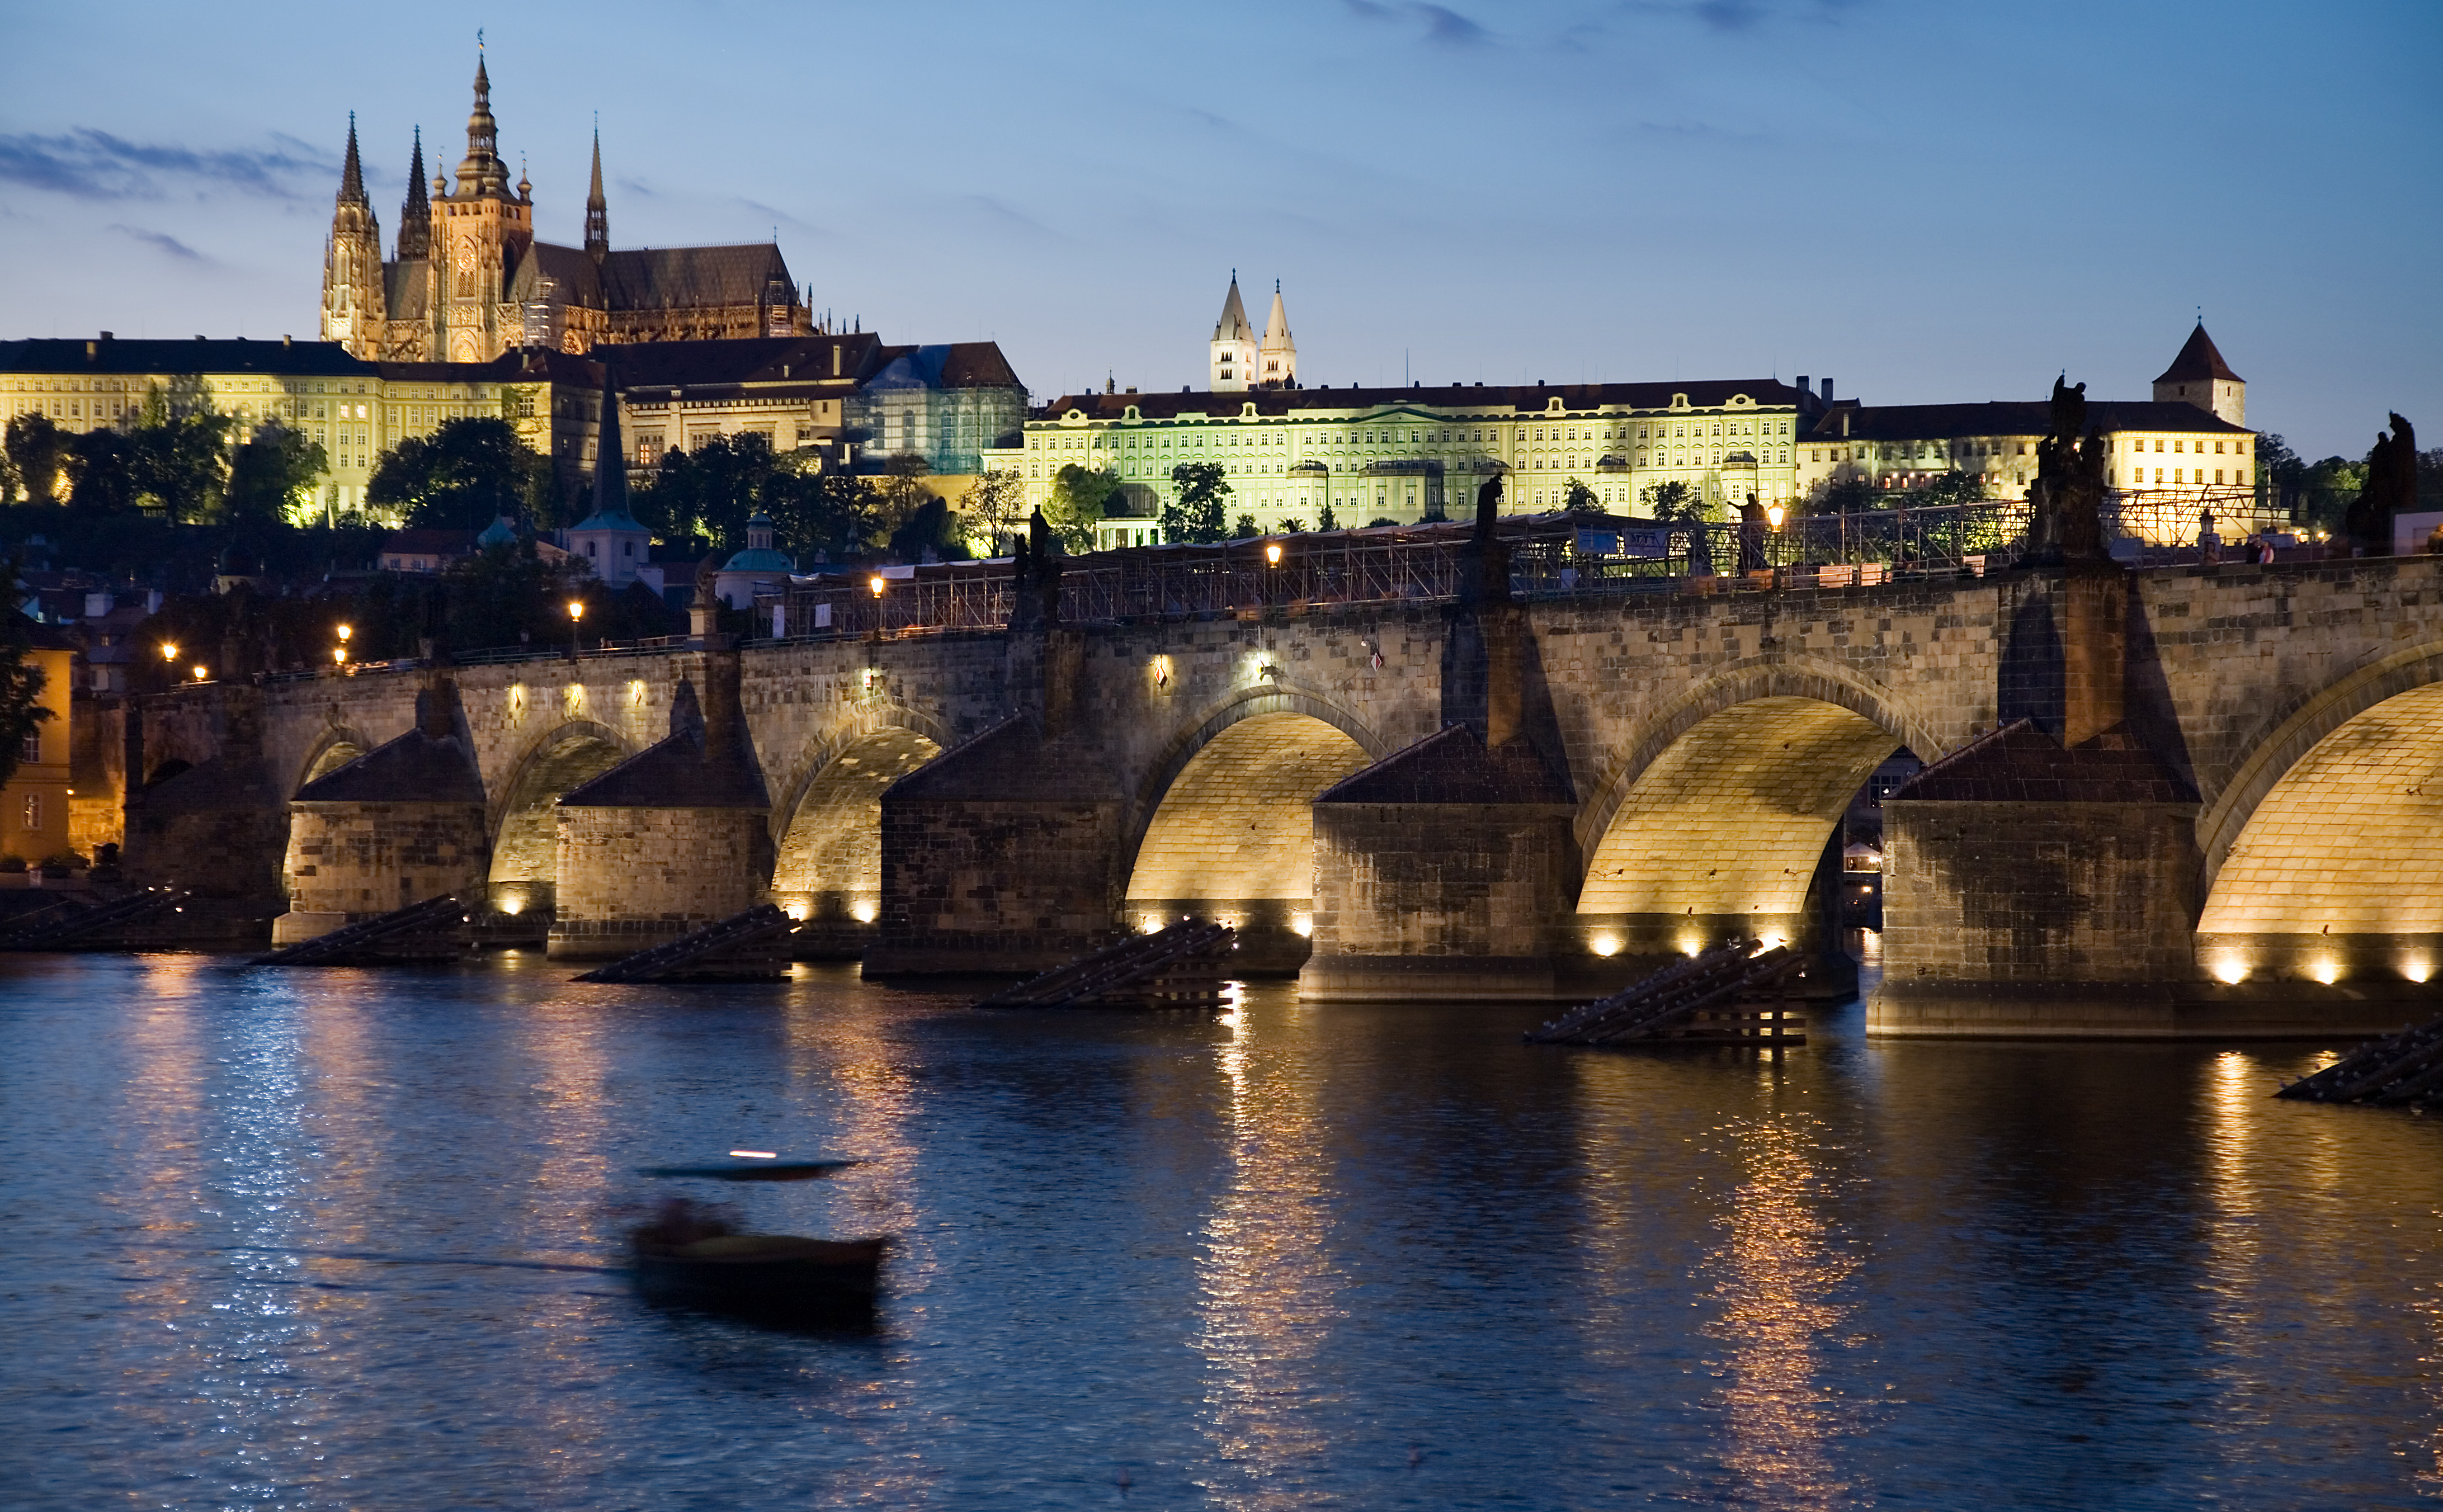 File:Night view of the Castle and Charles Bridge, Prague - 8019.jpg ...